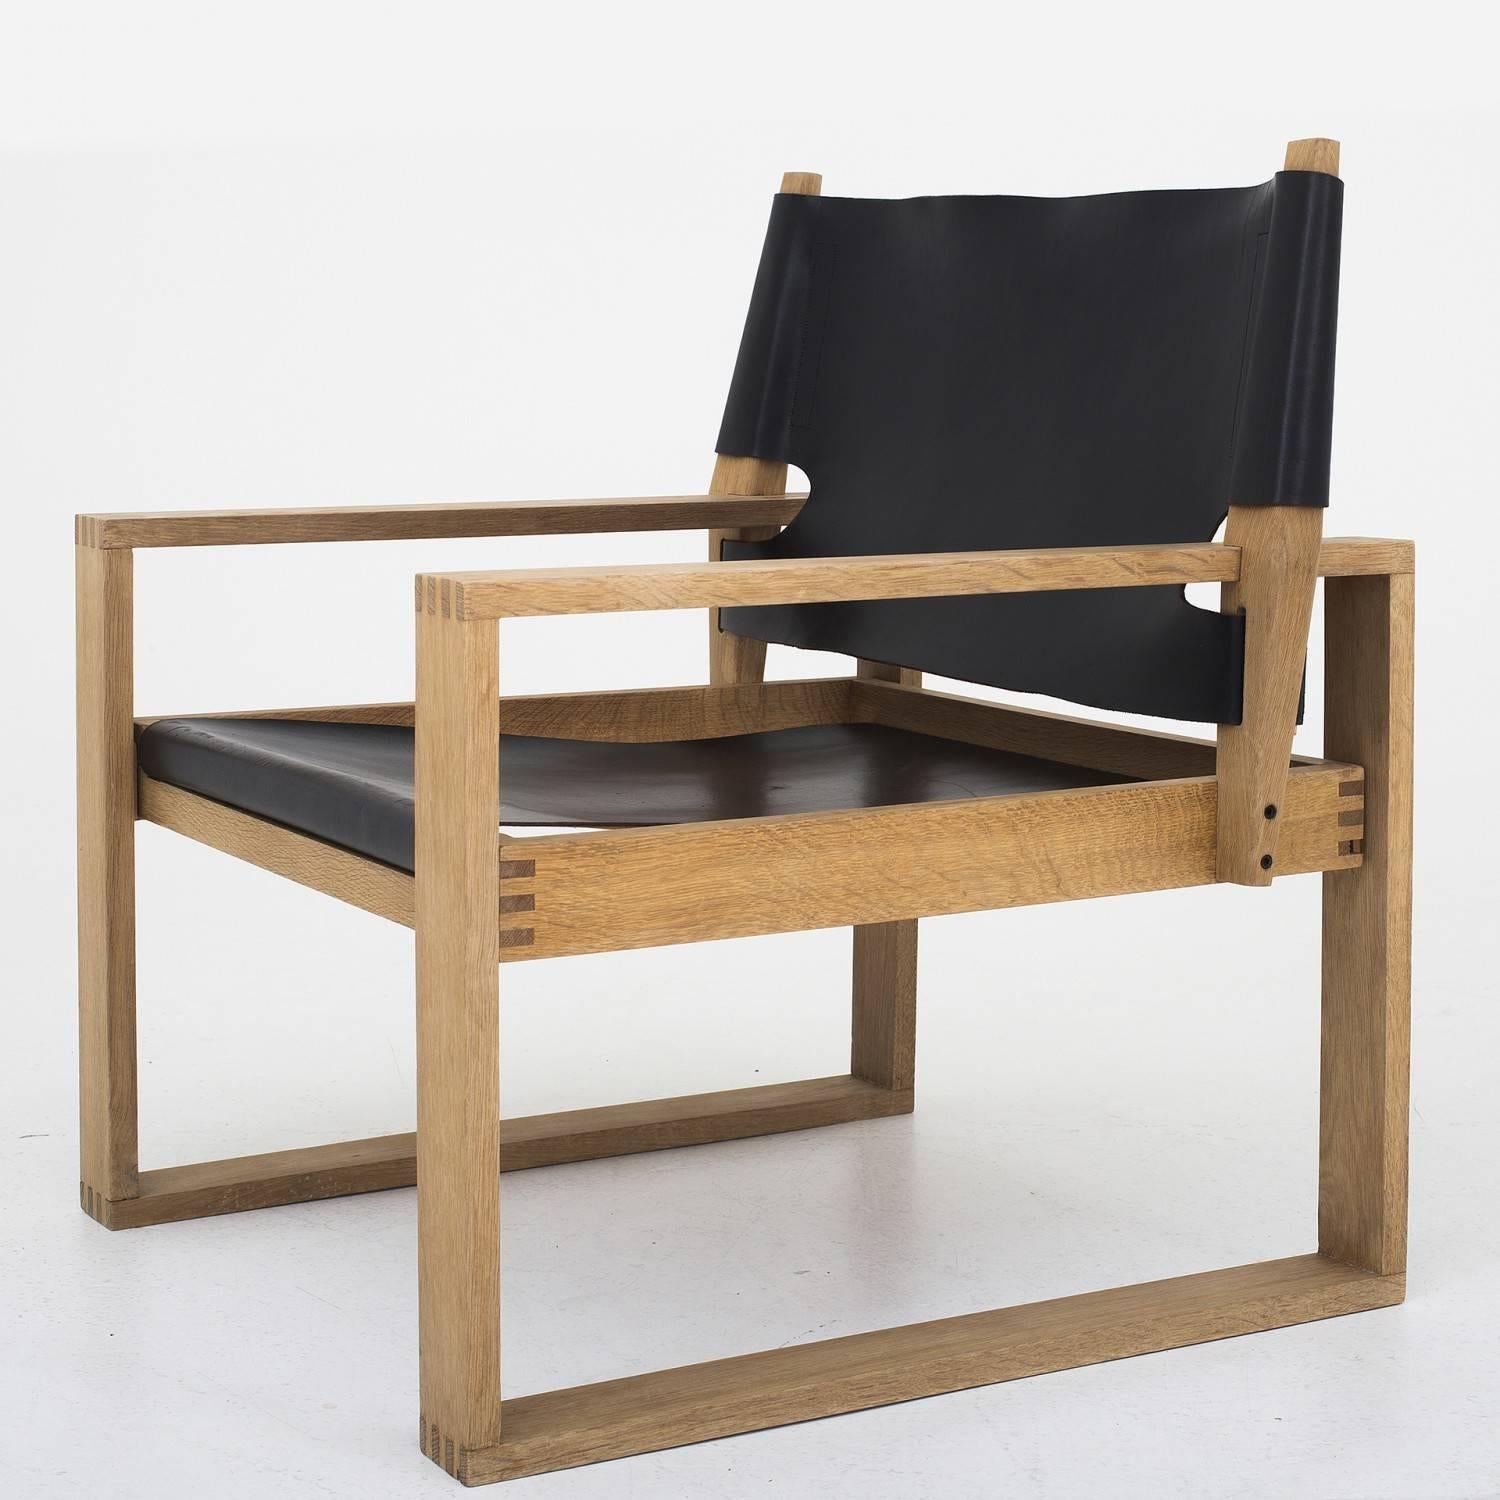 A pair of lounge chairs in oak and patinated leather. Designed by Svend Frandsen. Maker Hugo Frandsen.